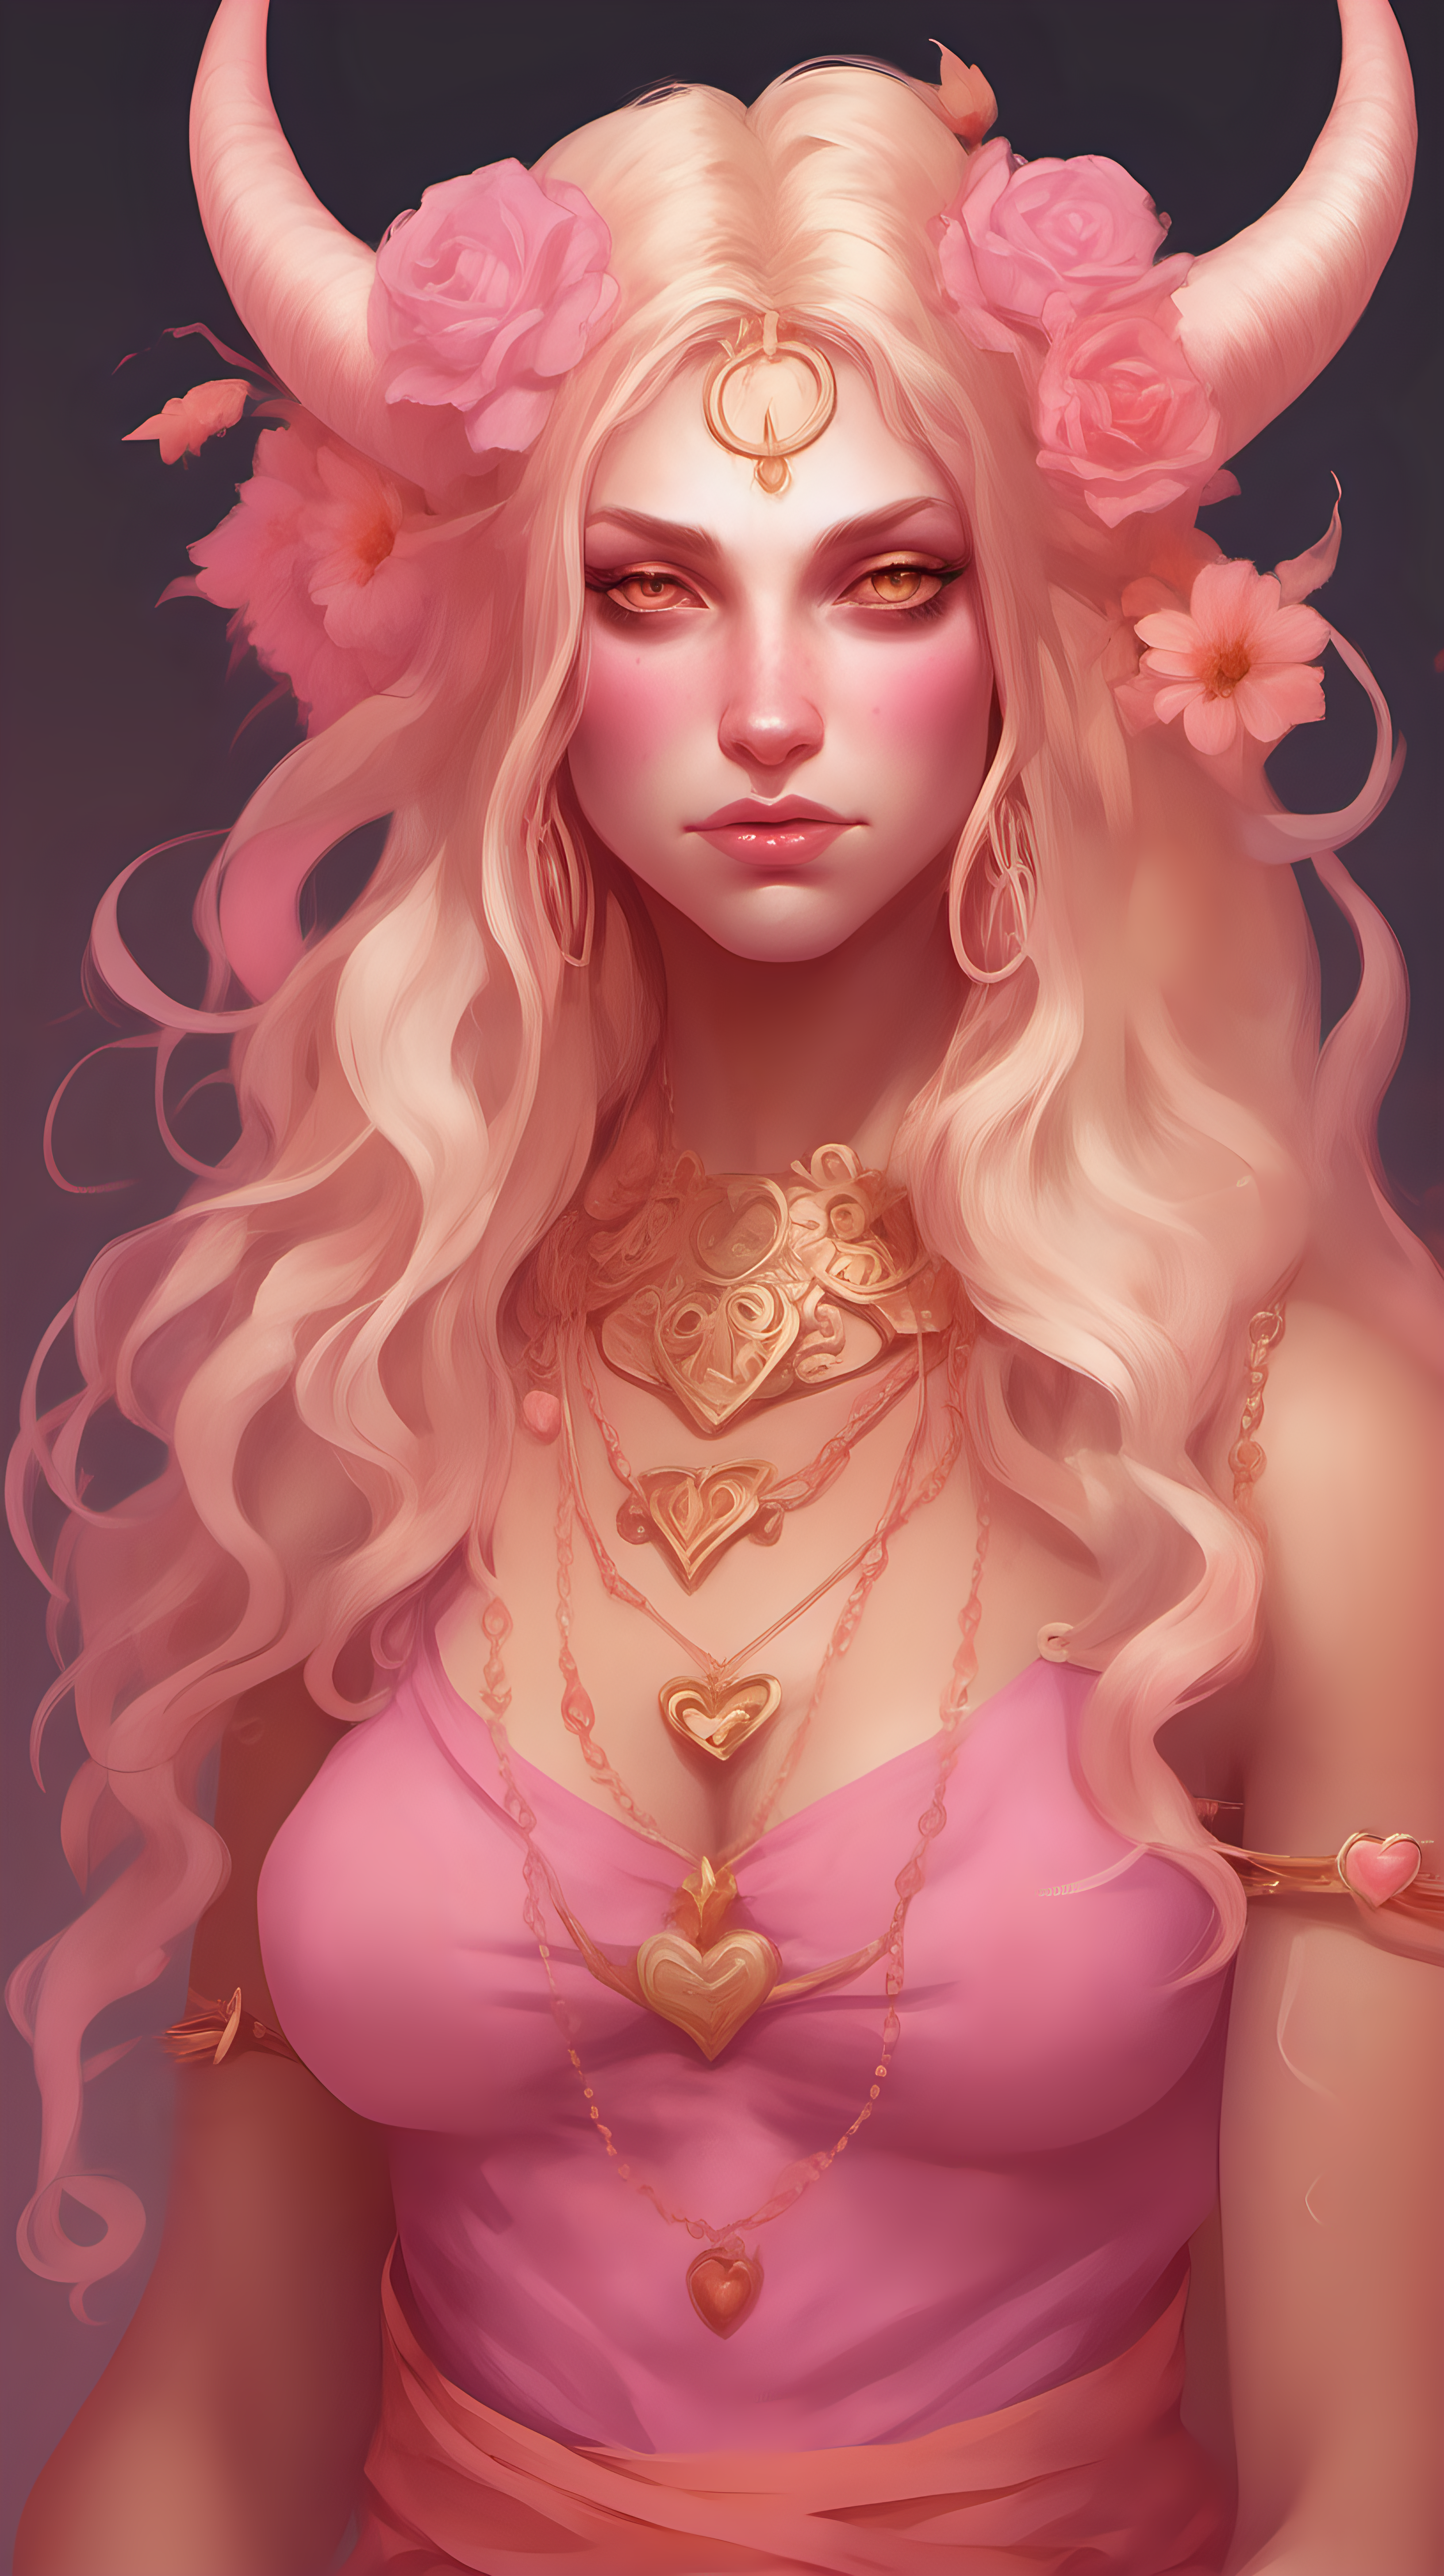 Tiefling woman with pink skin. She has white horns that meet at the top of her head to form a heart. She has light pink eyes. She has light blonde eyelashes. Her eyelashes are not black. She has blonde long hair with a orange tint. She is wearing a pink Greek-style dress with lots of flowers. She is wearing gold jewelry. She is holding a bouquet of pink flowers. She has an annoyed expression. 